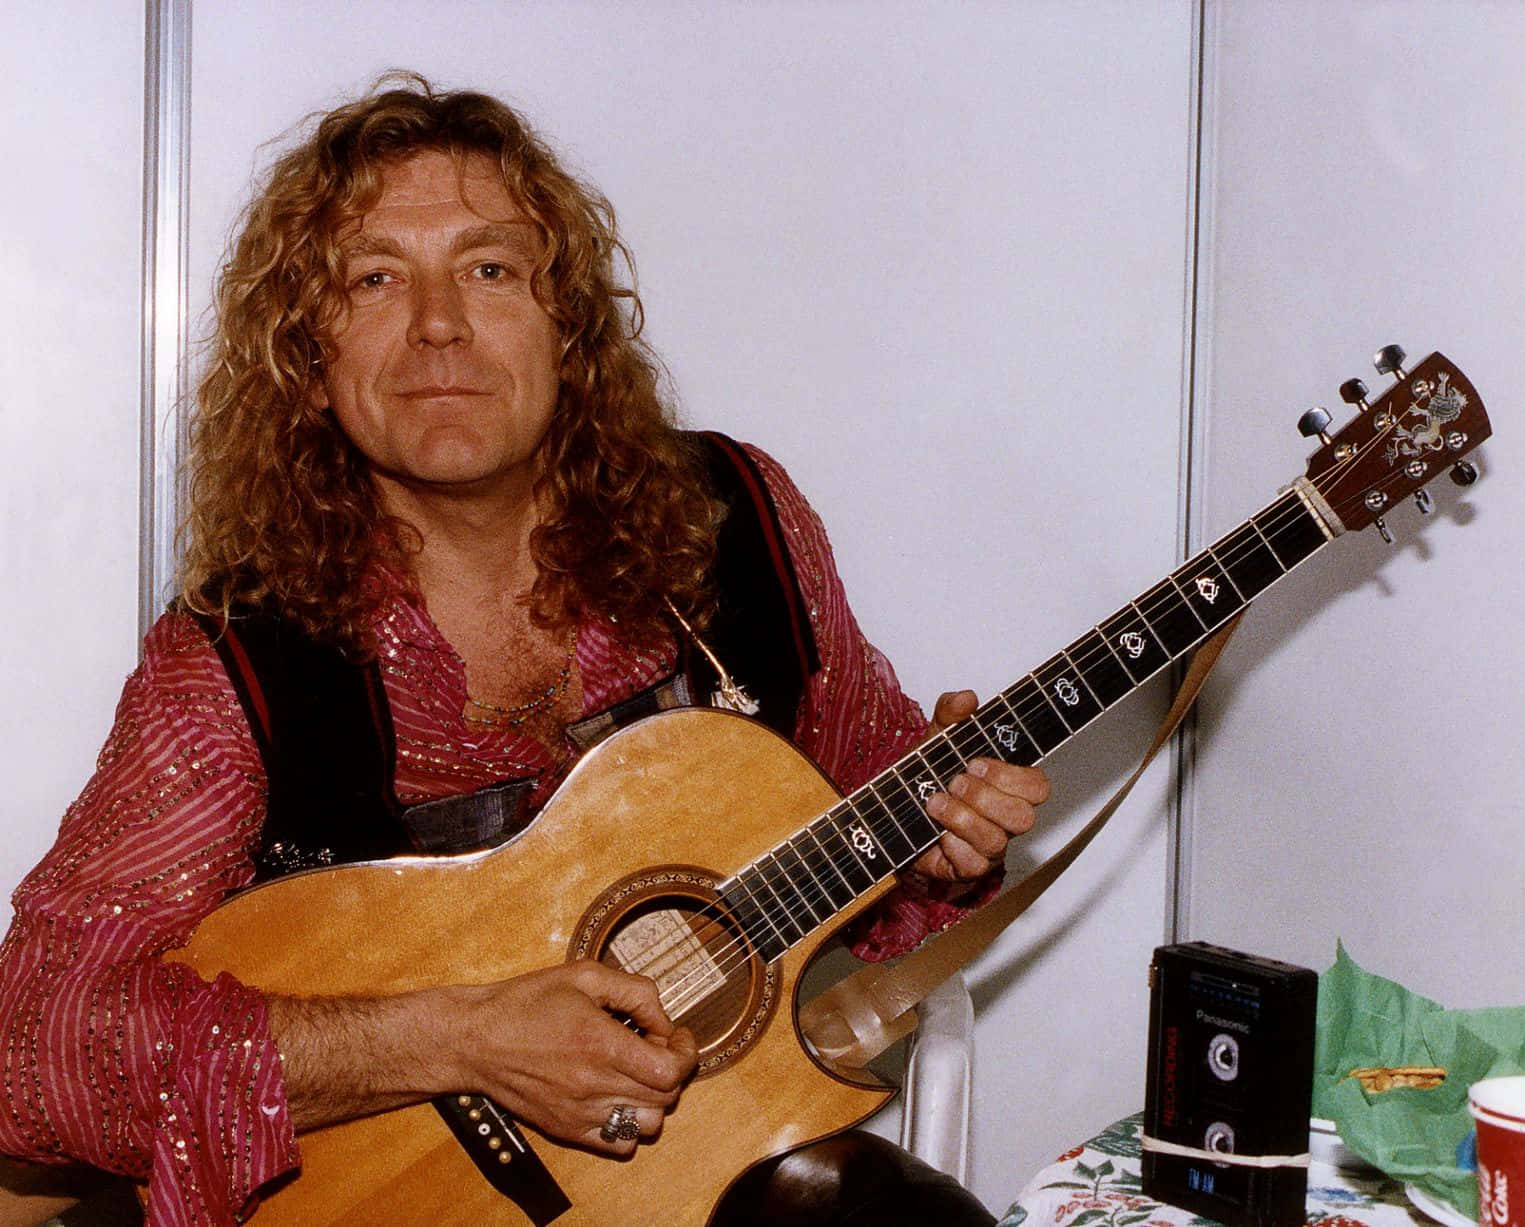 a man with long hair holding an acoustic guitar